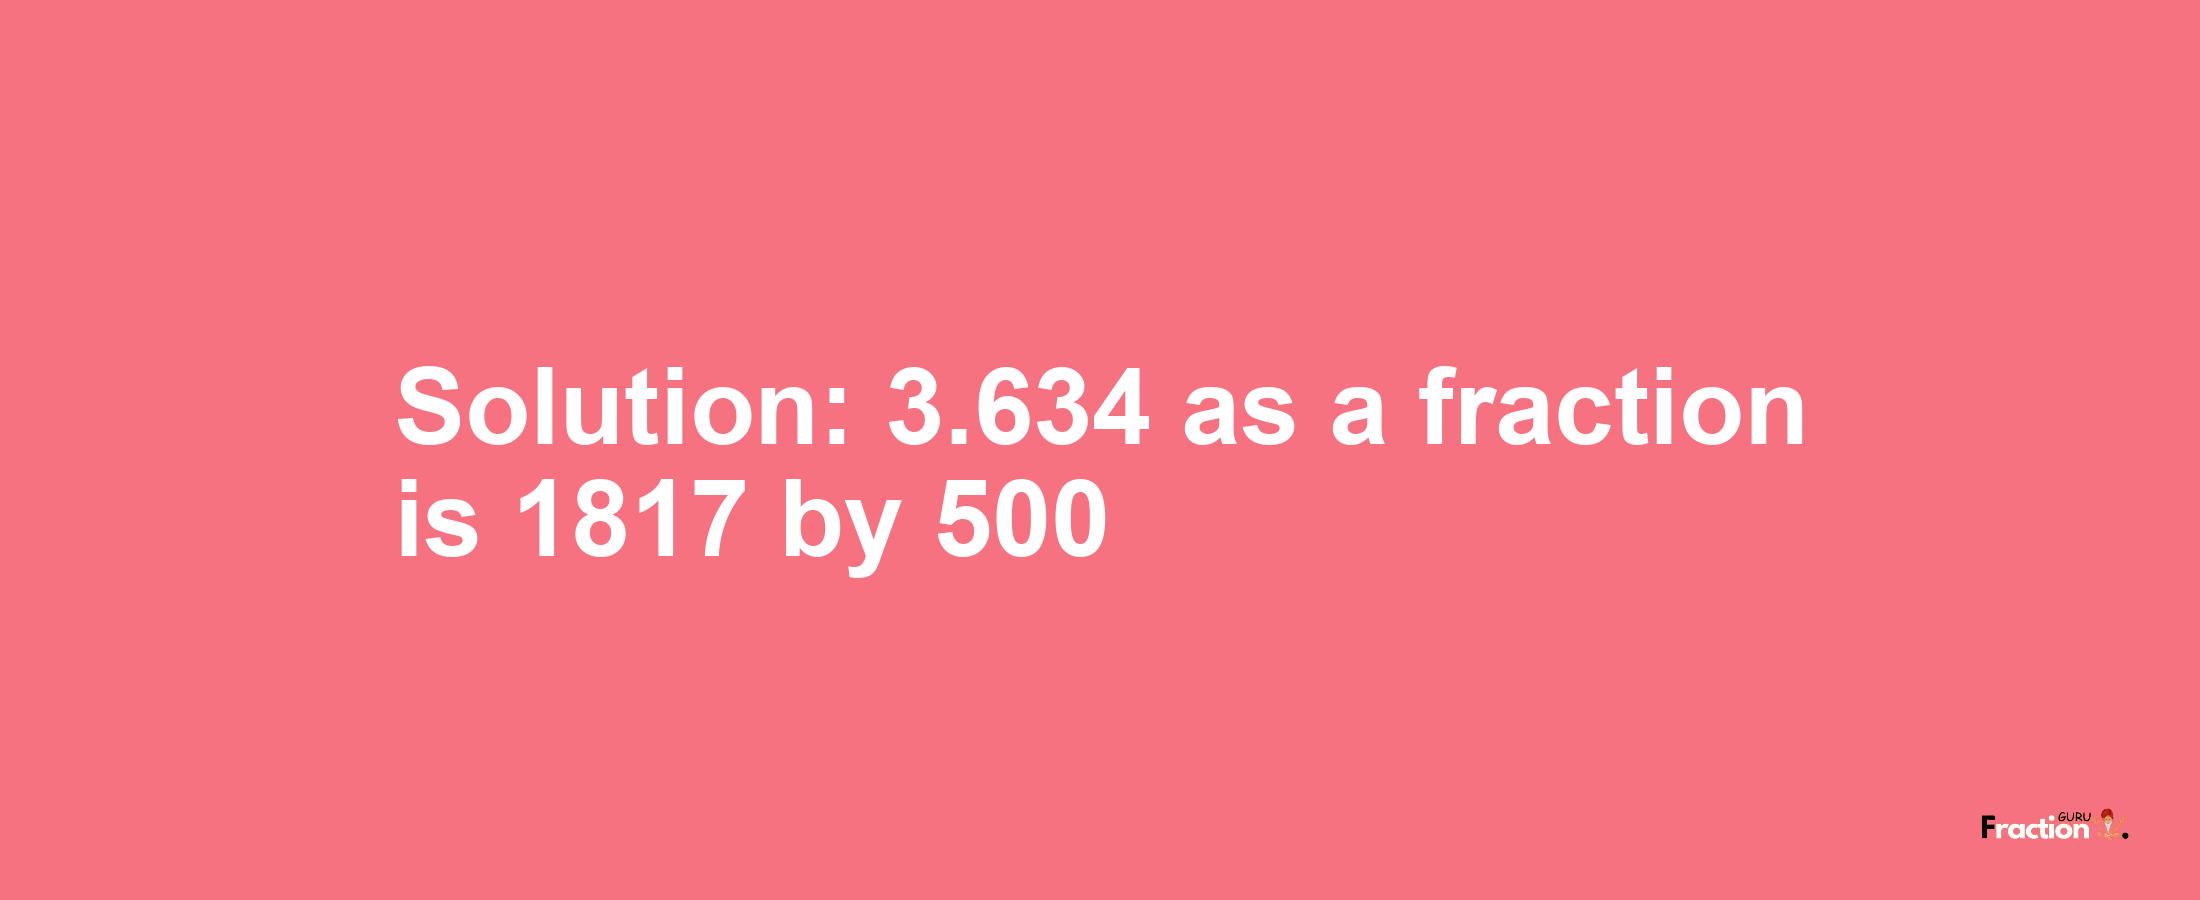 Solution:3.634 as a fraction is 1817/500